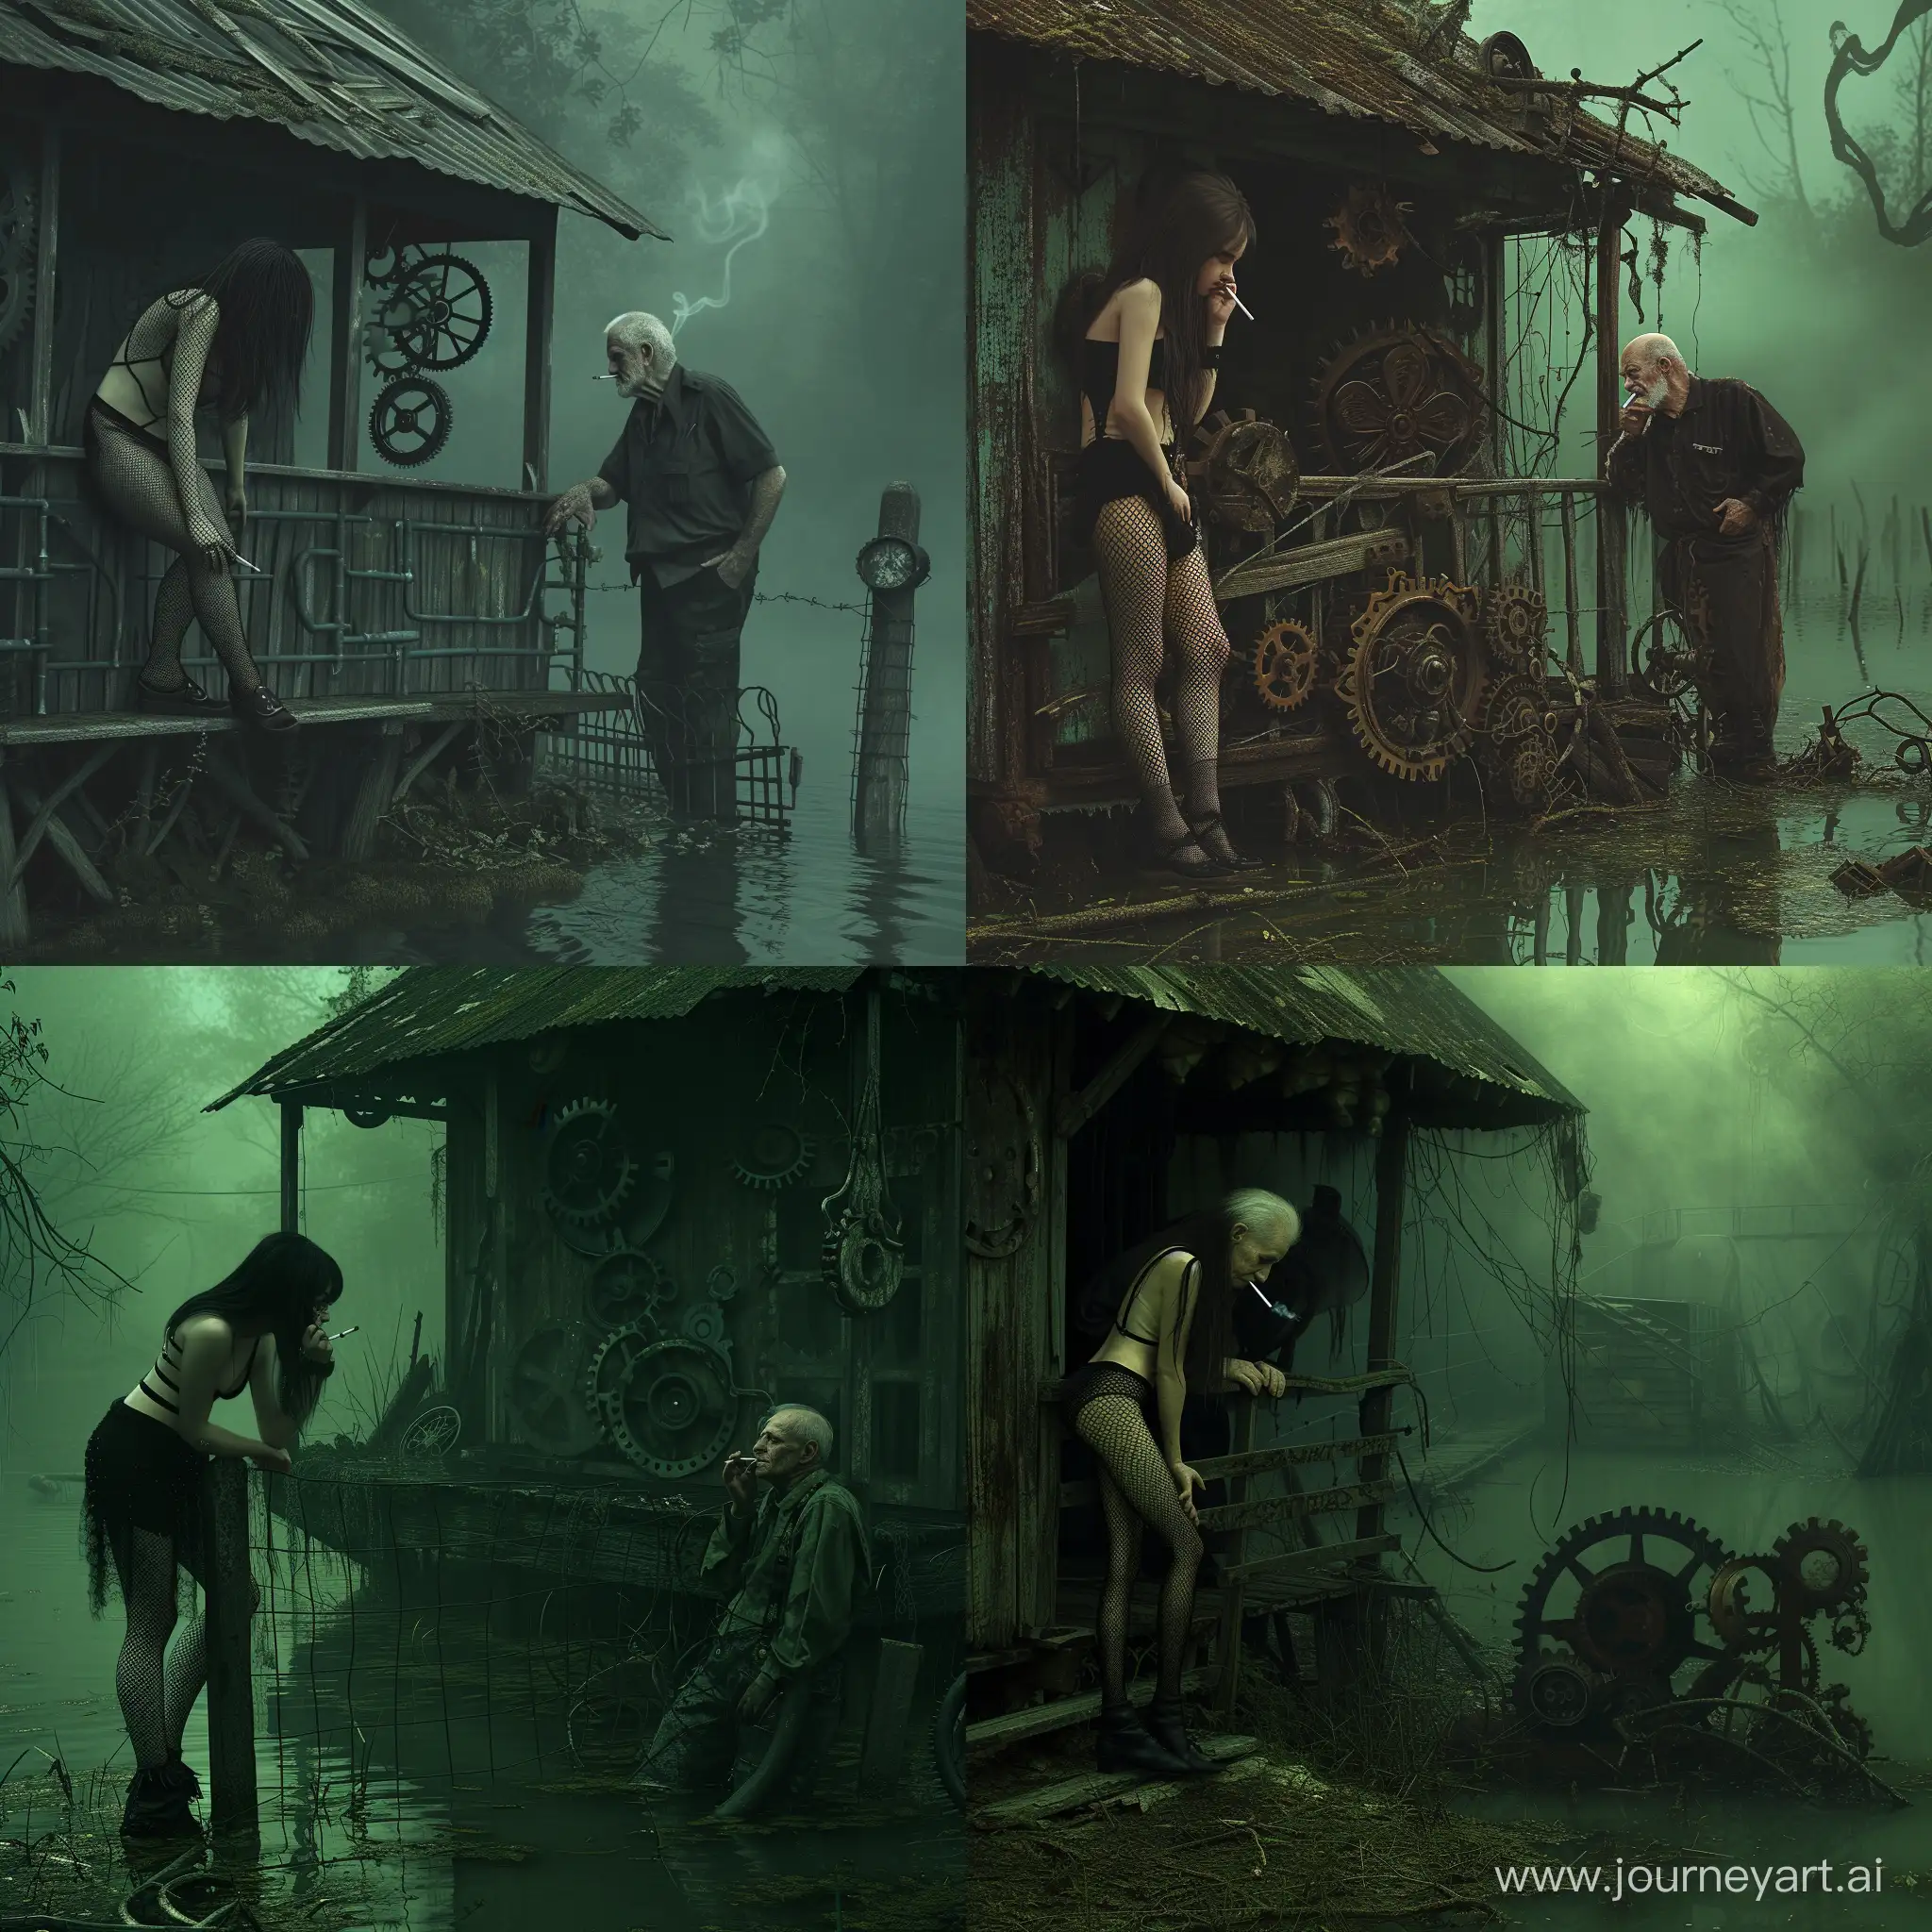 A goth girl in fishnet stockings and an old grandfather stands on the porch of a small old hut leaning on a fence and smoking a cigarette, with a sad face looking at gears and old abandoned mechanisms slightly peeking out of the water in a swamp, swampy area, dark green gloomy, realism, there is no light at night